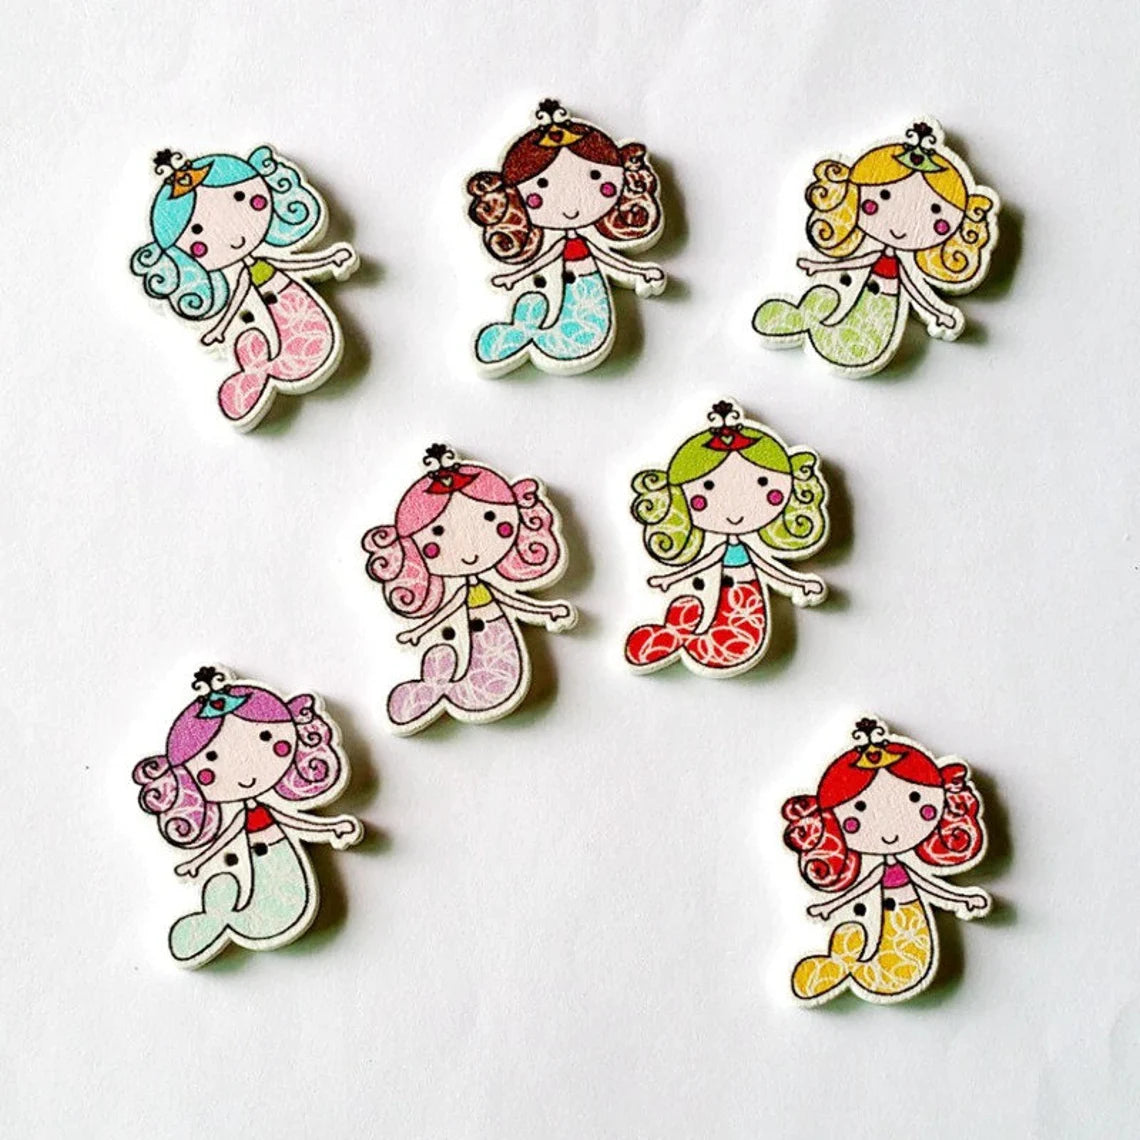 Colorful Mermaids Wooden Buttons - Set of 6